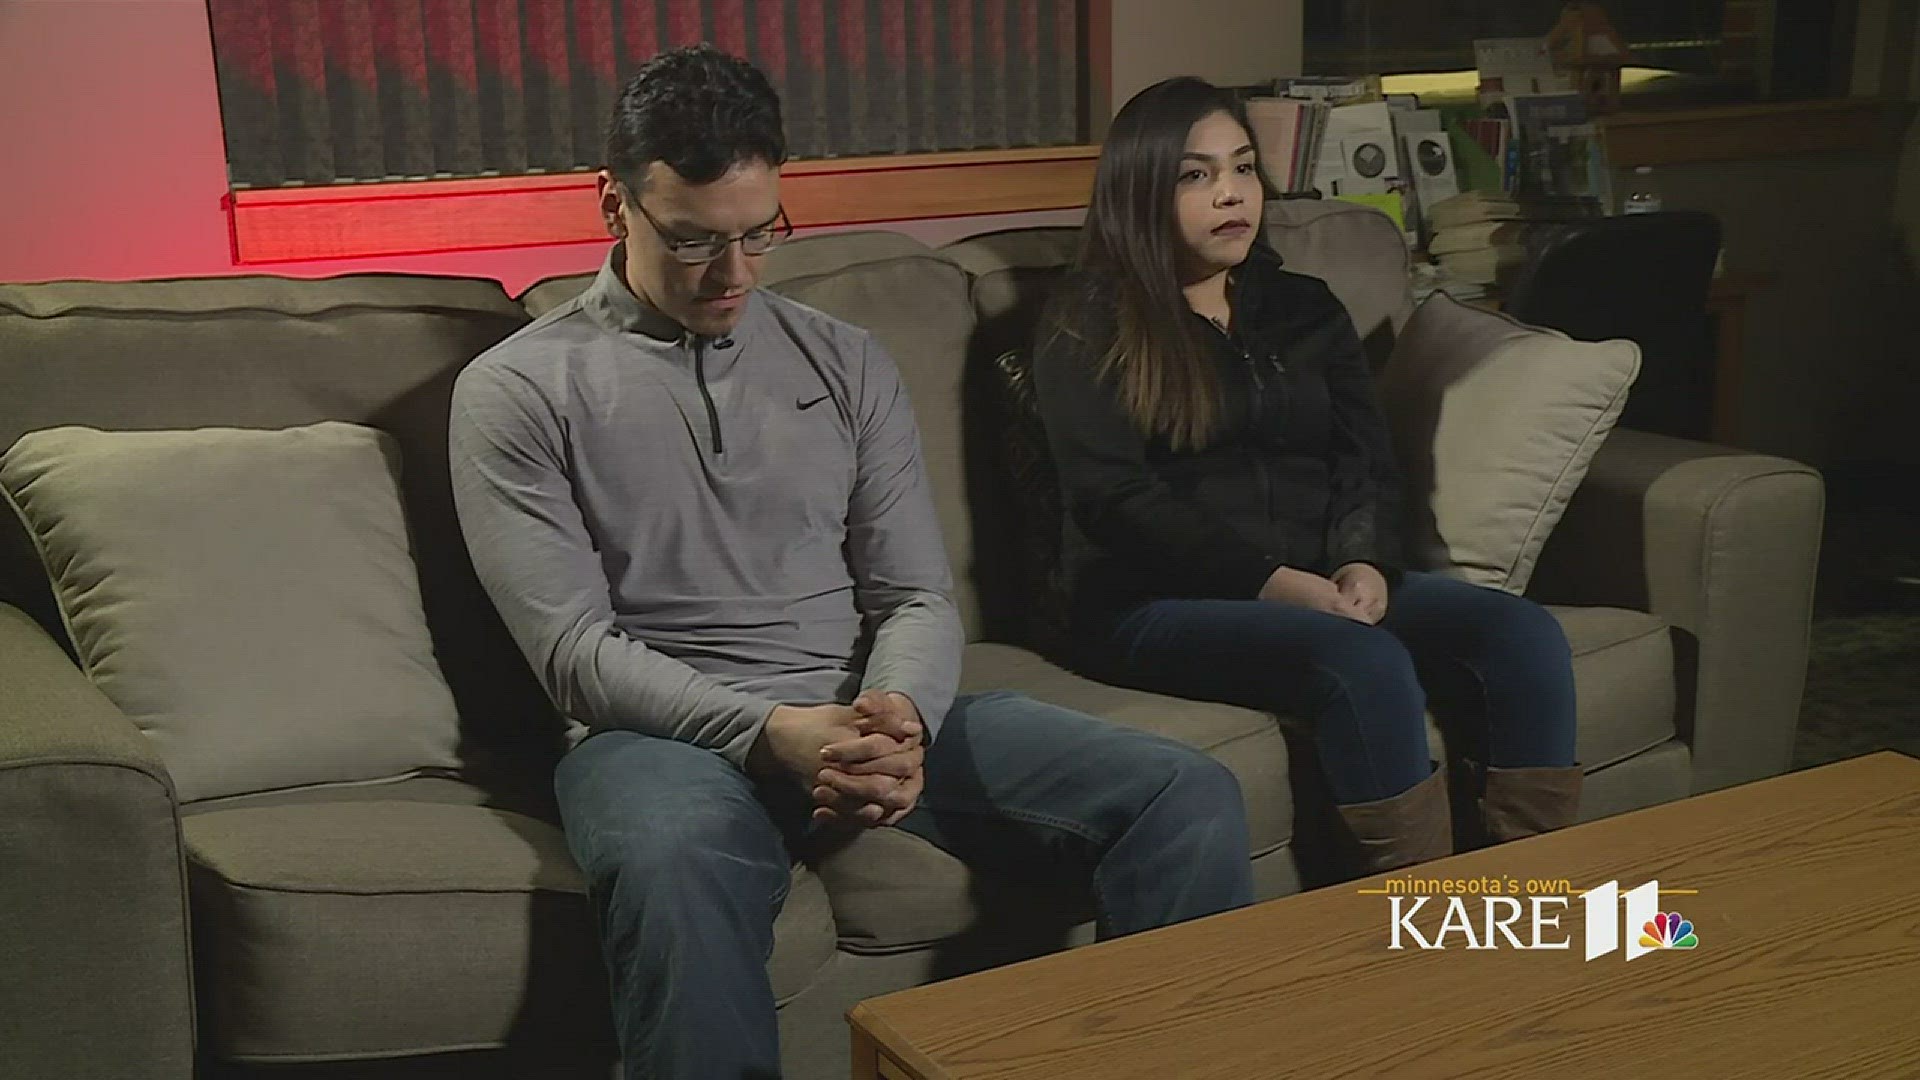 March 21 will mark the 13-year anniversary of the worst school shooting in Minnesota history. Two survivors of that horrific day in Red Lake share their experience. http://kare11.tv/2F3ZJbN